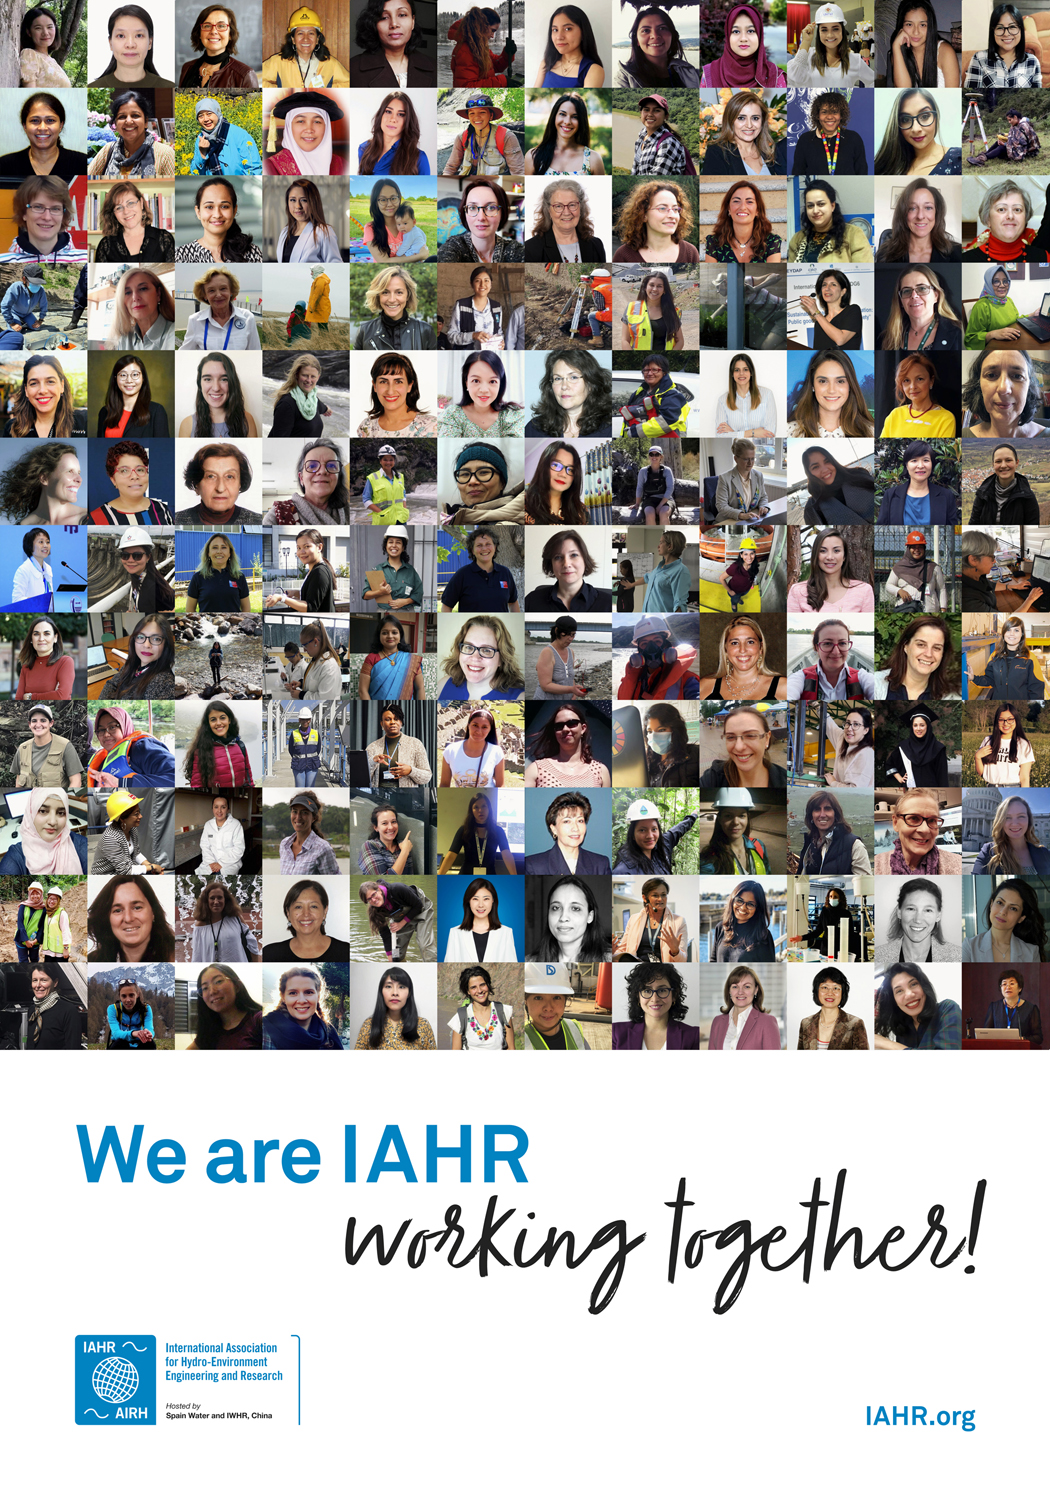 We are IAHR working together!